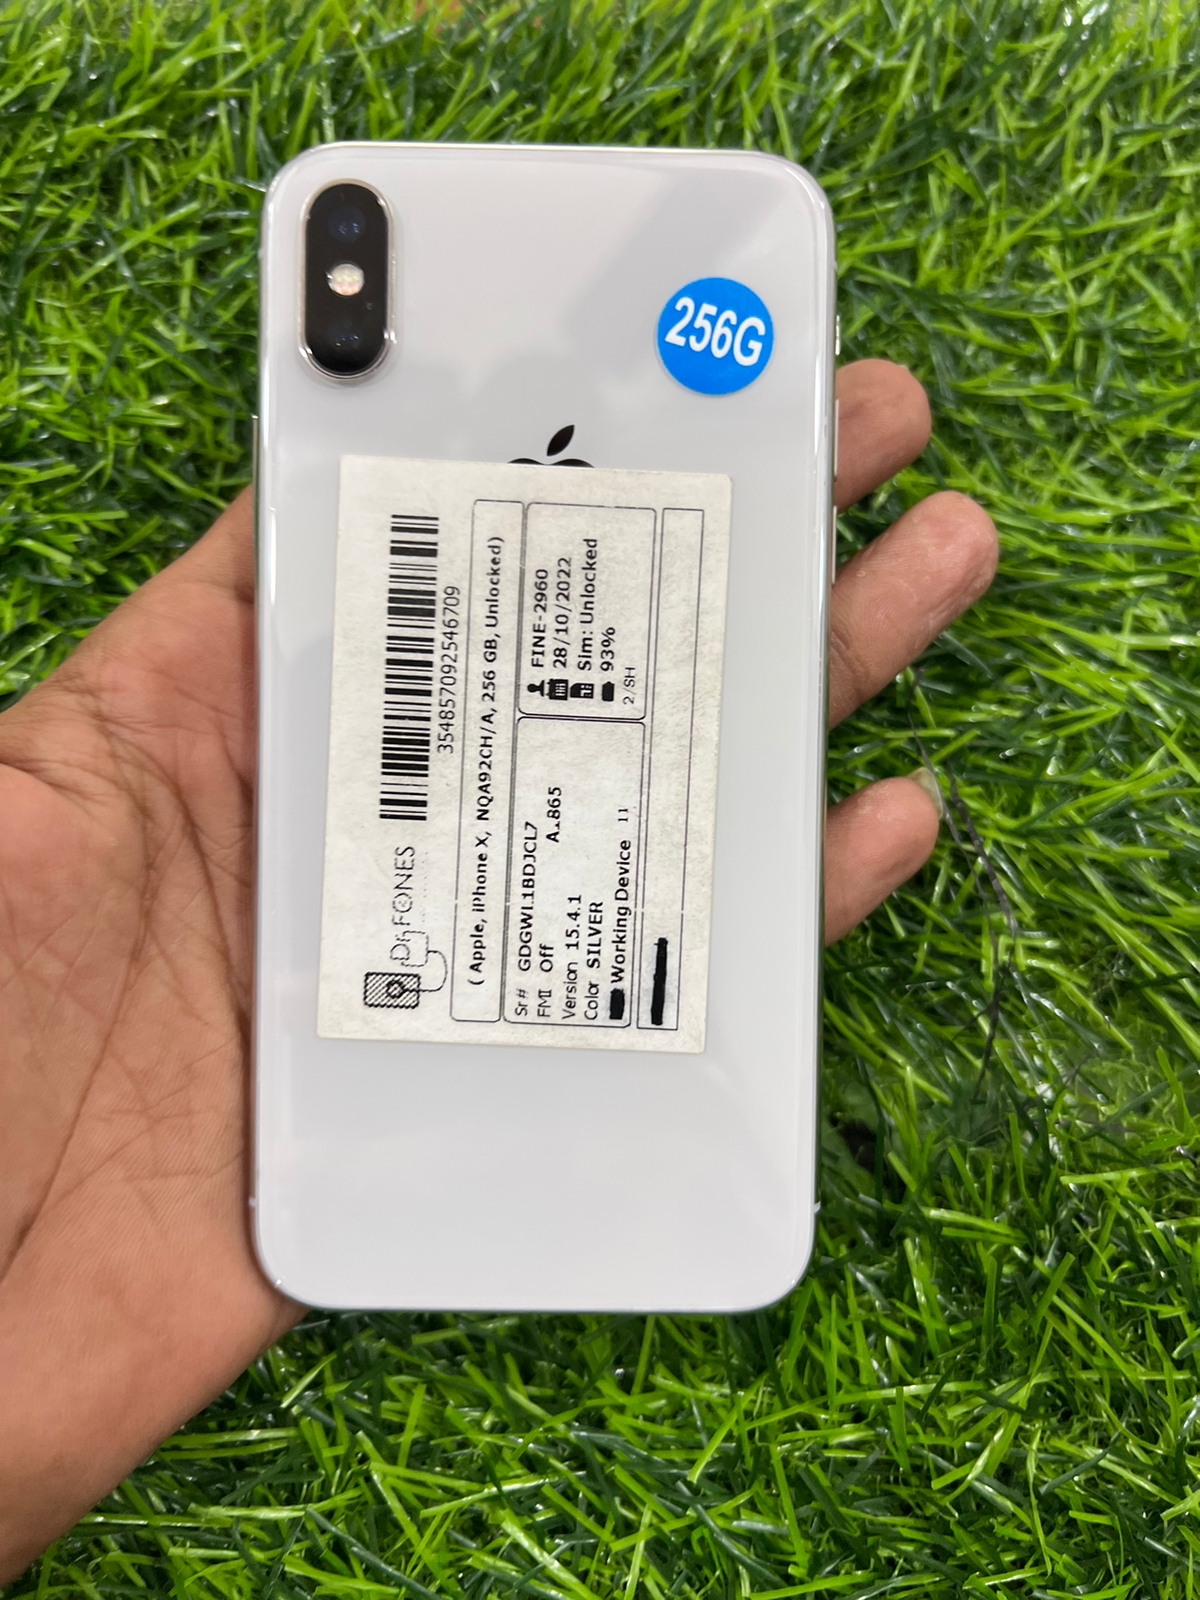 Details View - I phone x photos - apple iphone x price in india,buy iphone x online,cheap iphone x,refurbished iphone x,best deal on iphone x,iphone x specifications,iphone x features,iphone x review,iphone x battery health,iphone x for sale,reseller bazzar